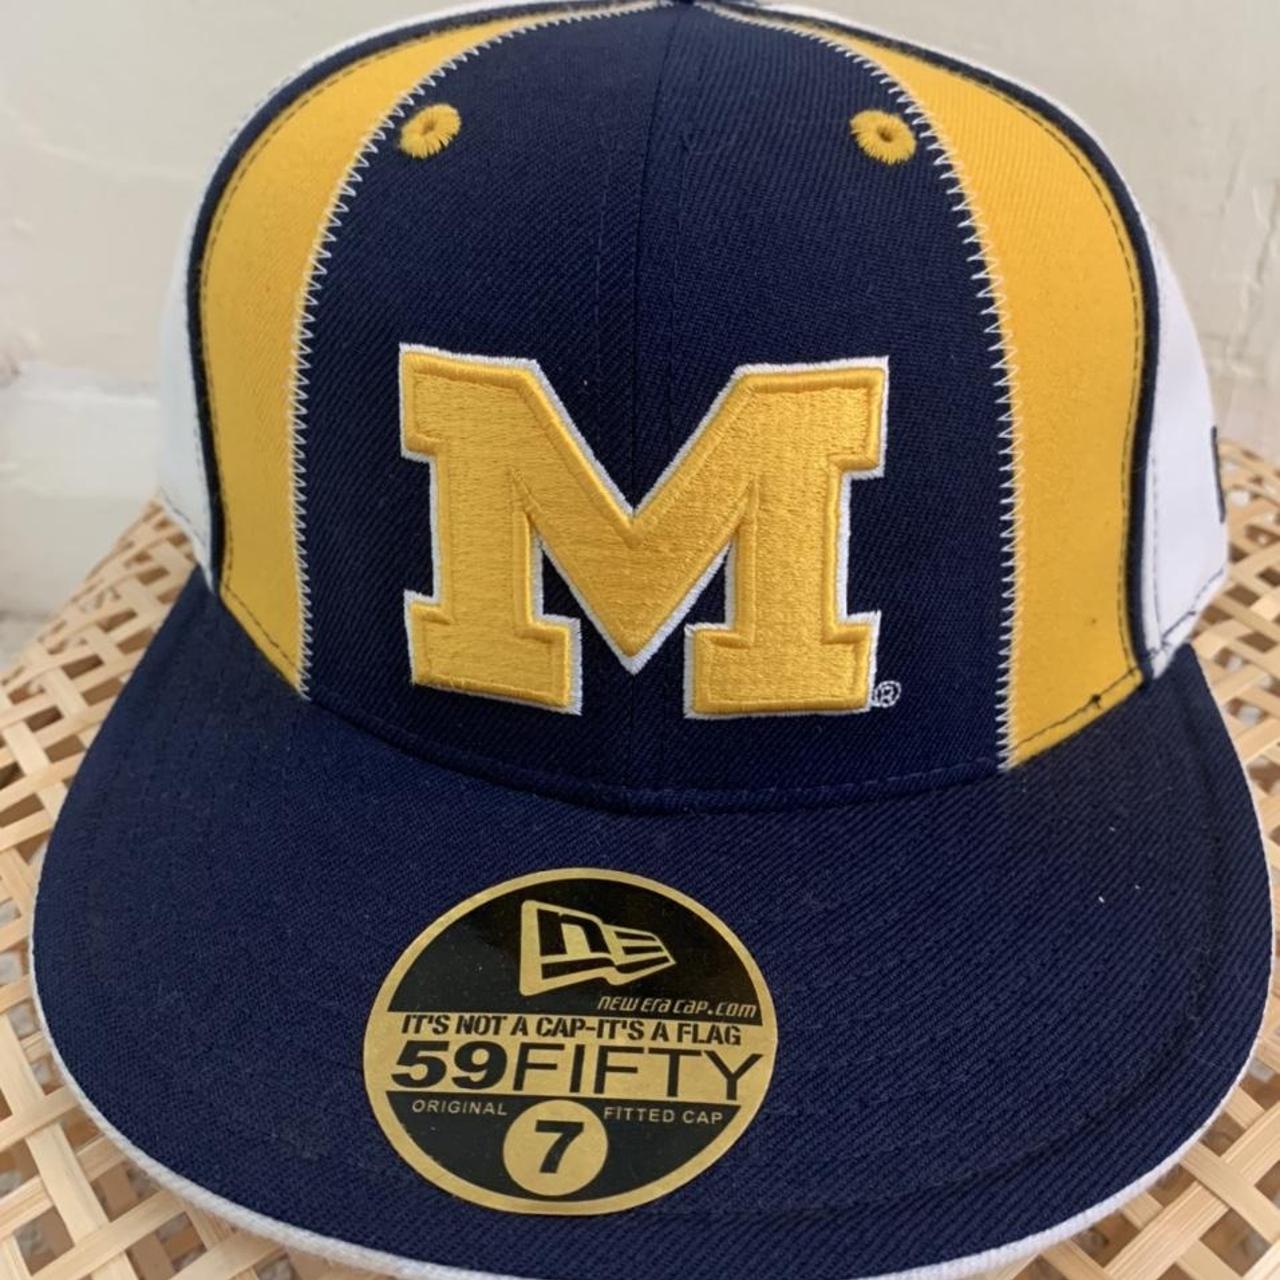 michigan-new-era-hat-size-can-be-seen-on-the-depop